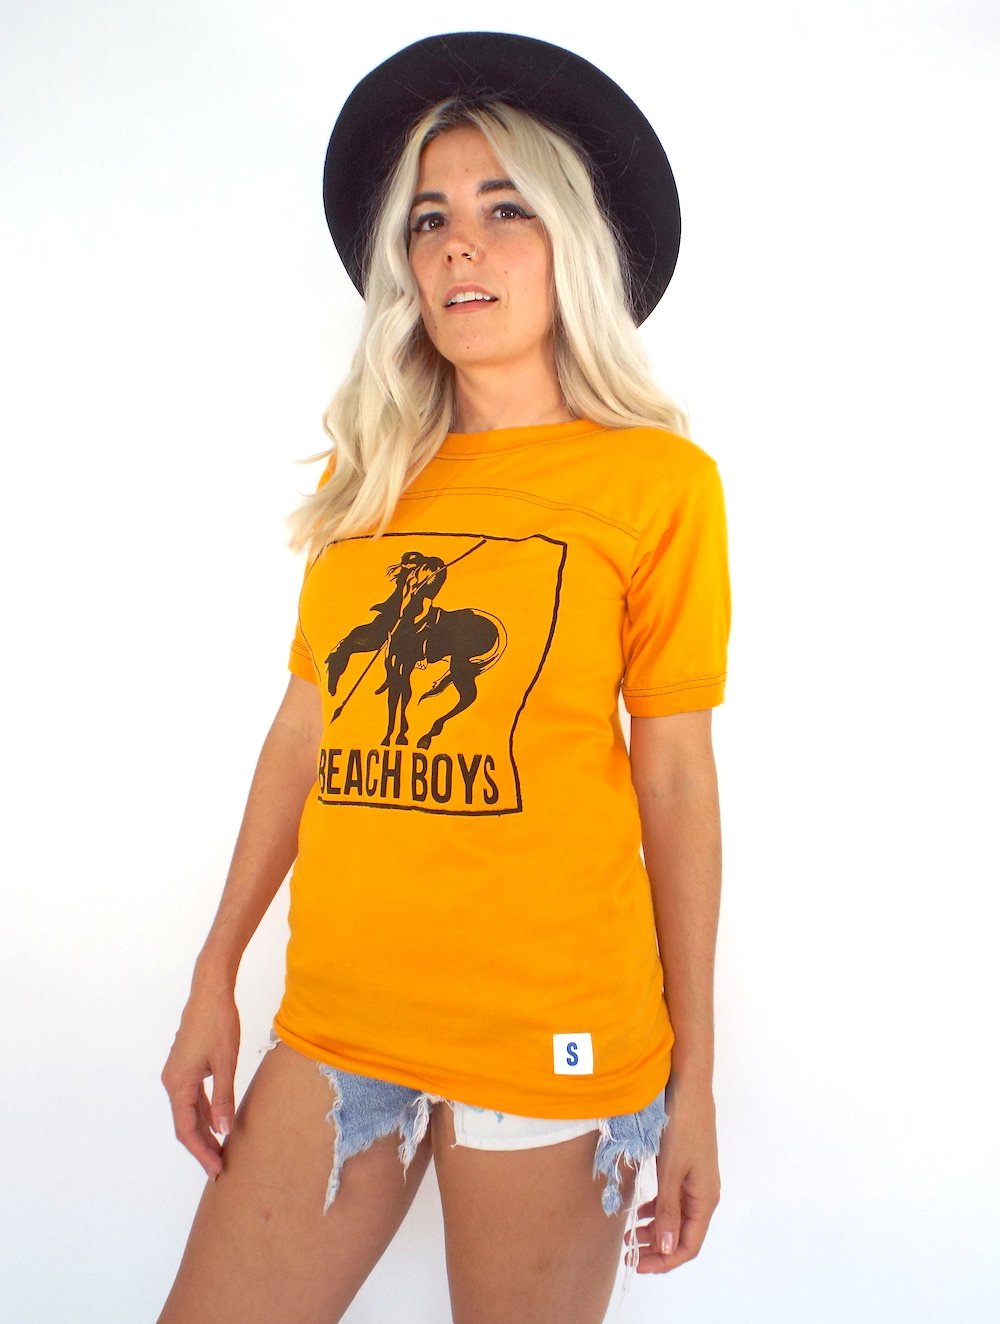 Vintage 70s Gold and Black Beach Boys Tee – Total Recall Vintage